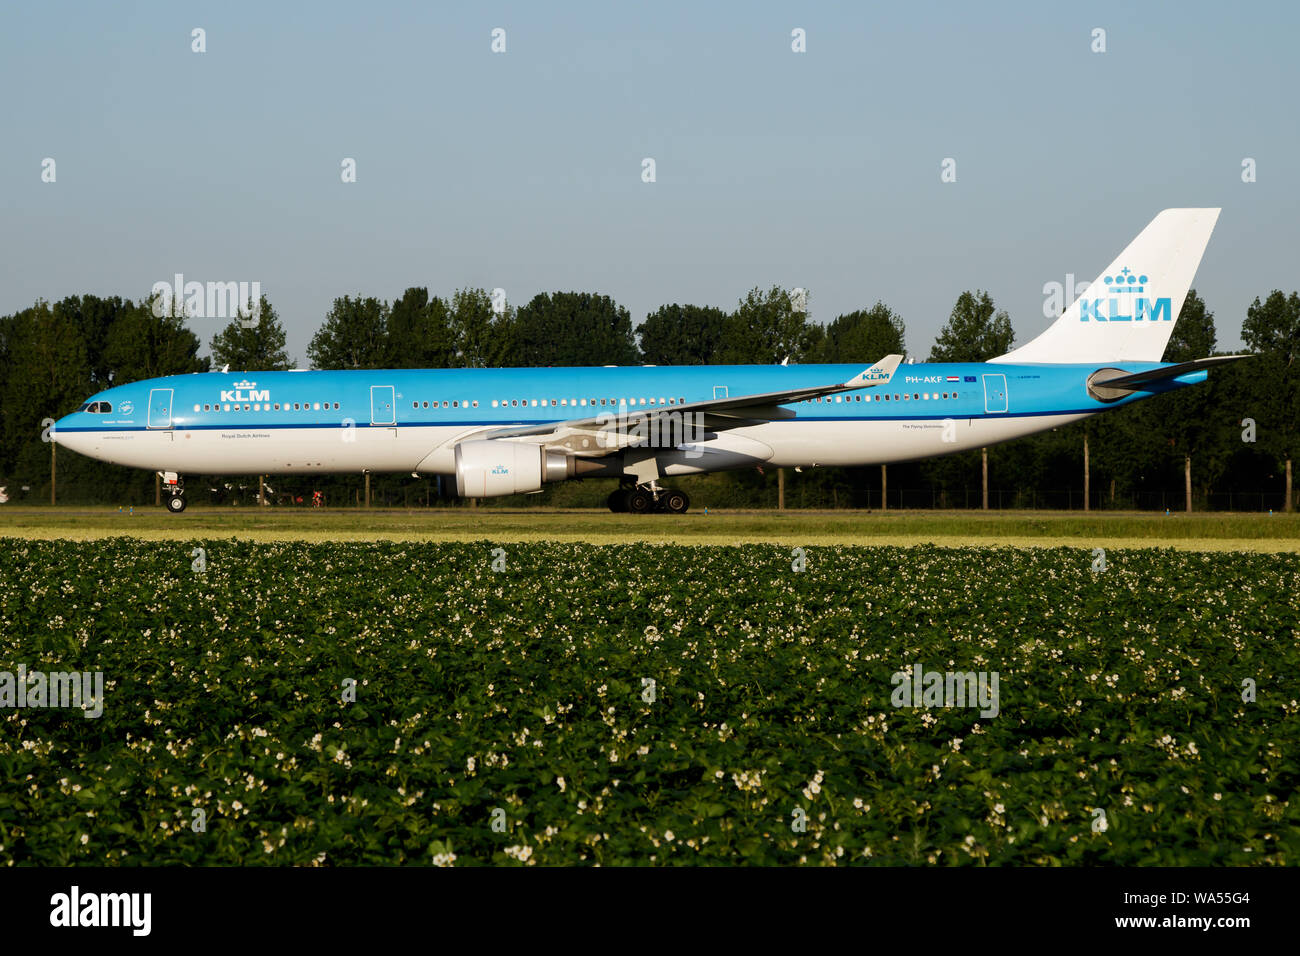 AMSTERDAM / NETHERLANDS - JULY 3, 2017: KLM Royal Dutch Airlines Airbus A330-300 PH-AKF passenger plane taxiing at Amsterdam Schipol Airport Stock Photo